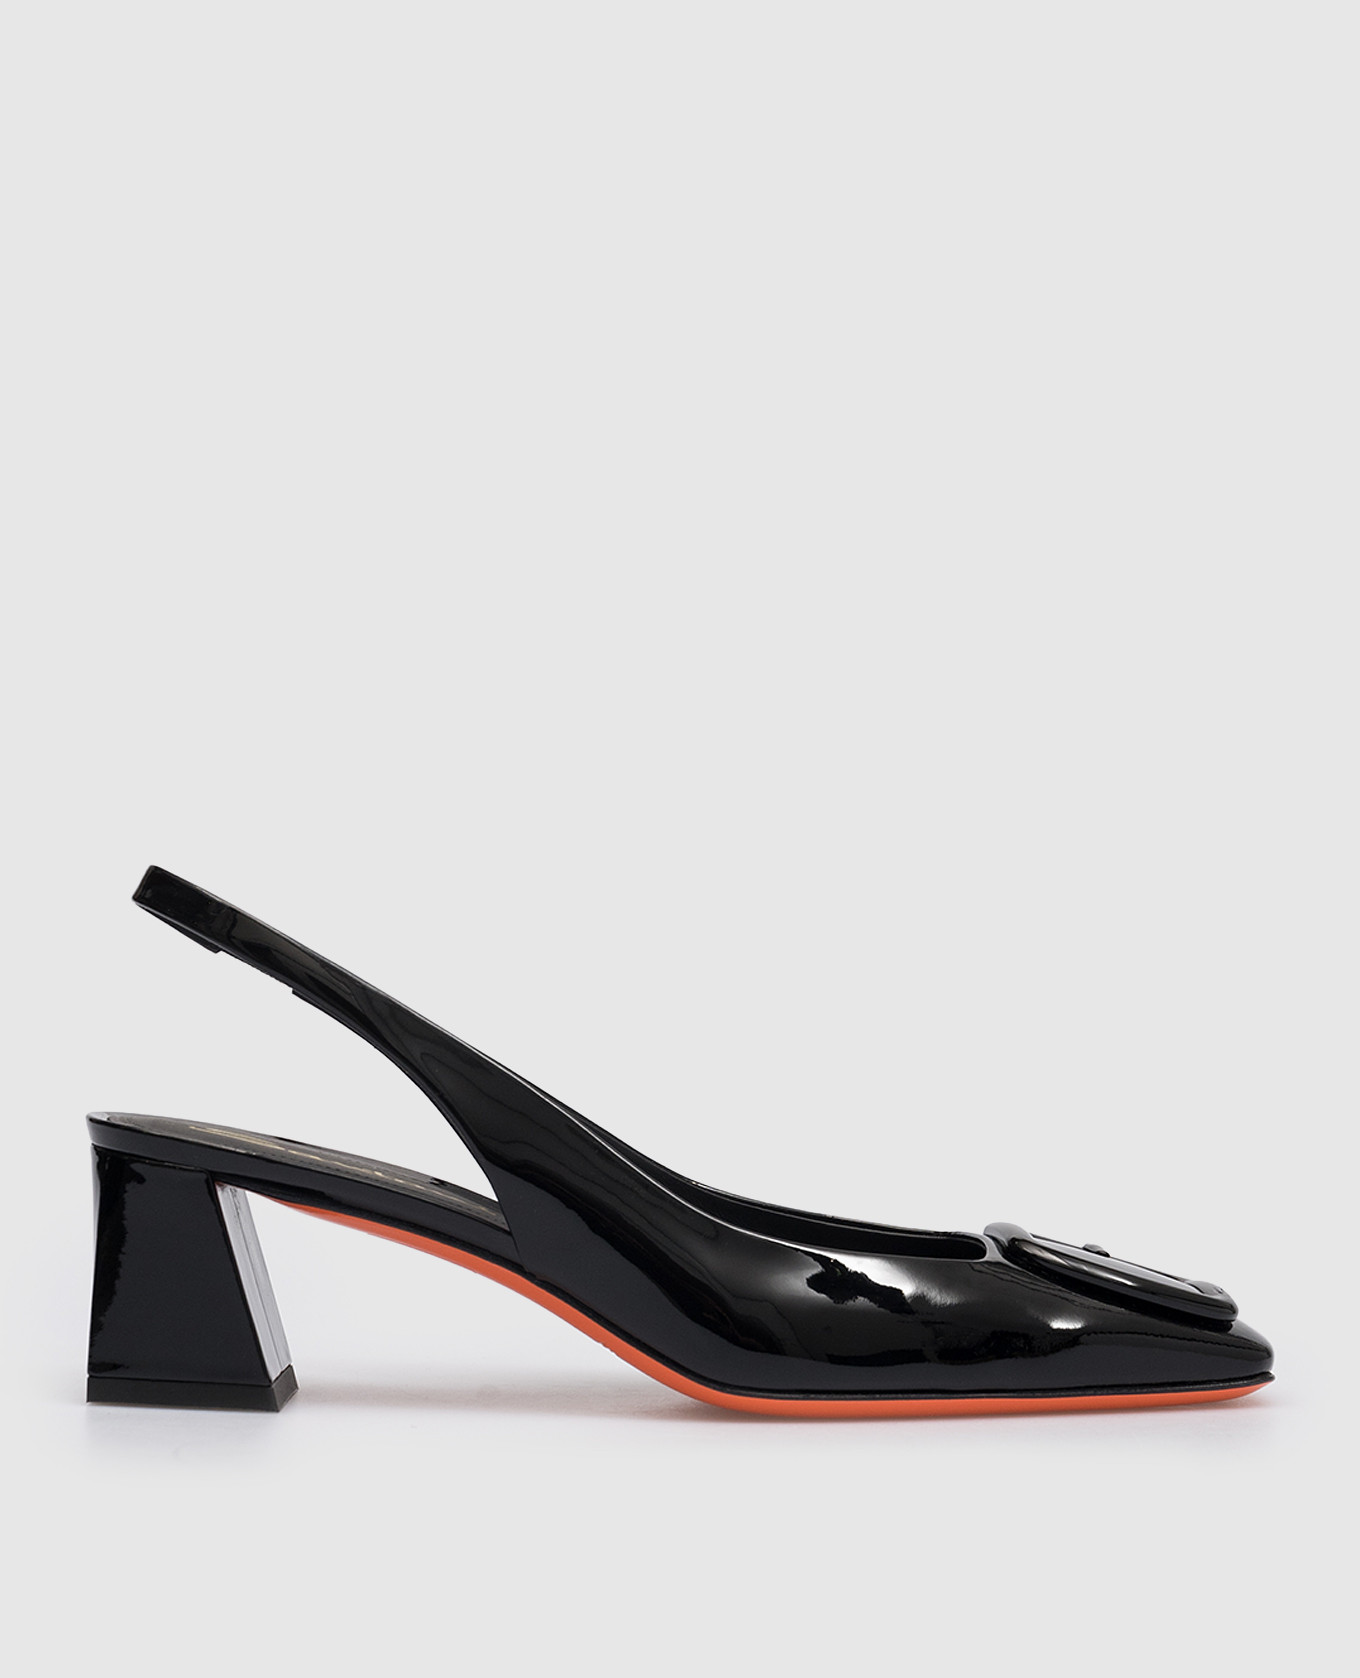 Black patent leather slingbacks with a buckle